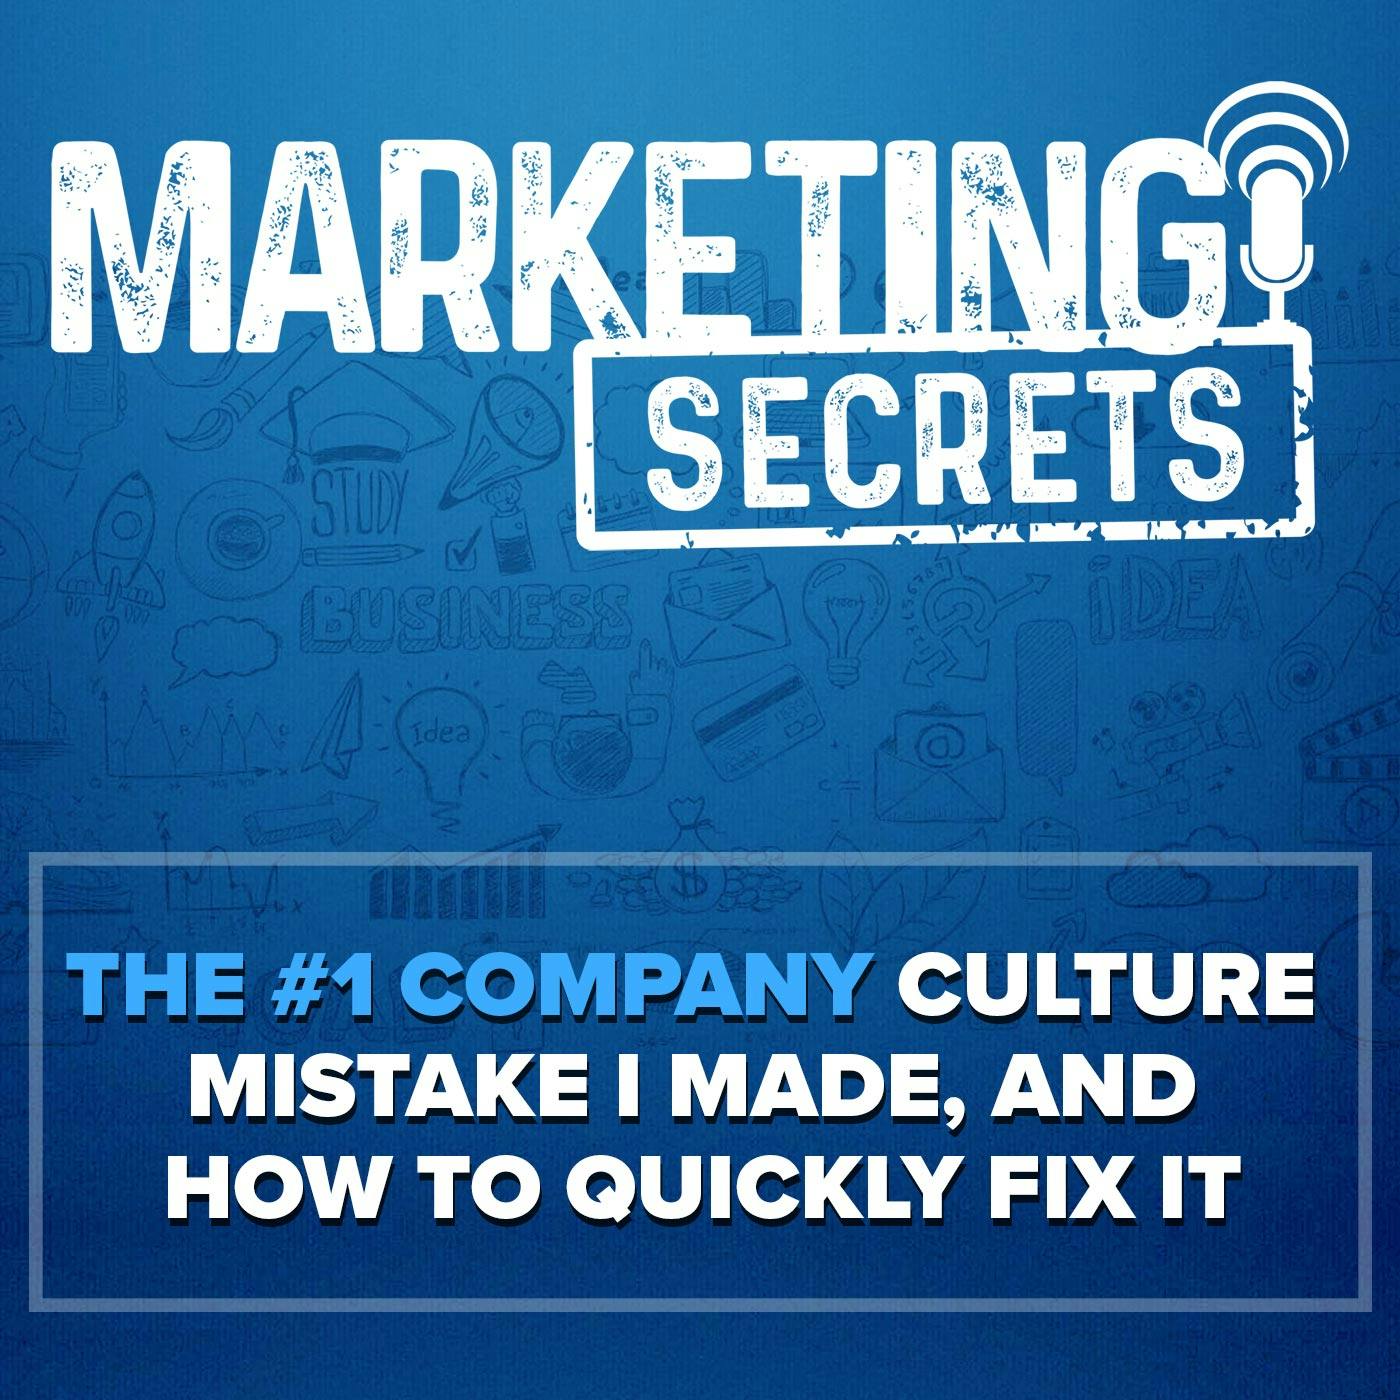 The #1 Company Culture Mistake I Made, And How To Quickly Fix It by Russell Brunson